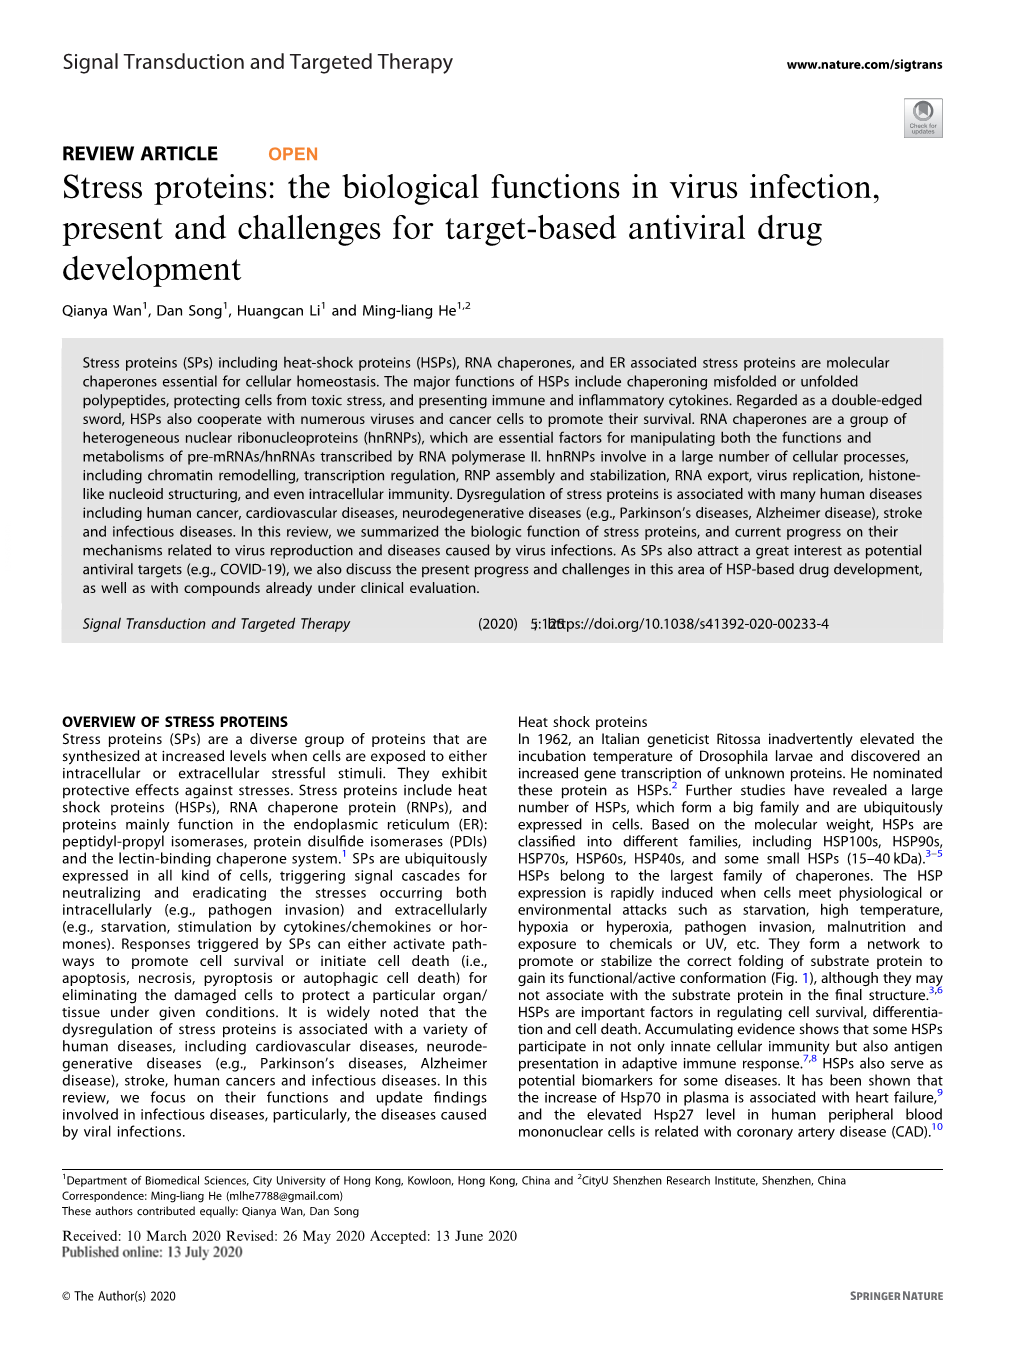 Stress Proteins: the Biological Functions in Virus Infection, Present and Challenges for Target-Based Antiviral Drug Development